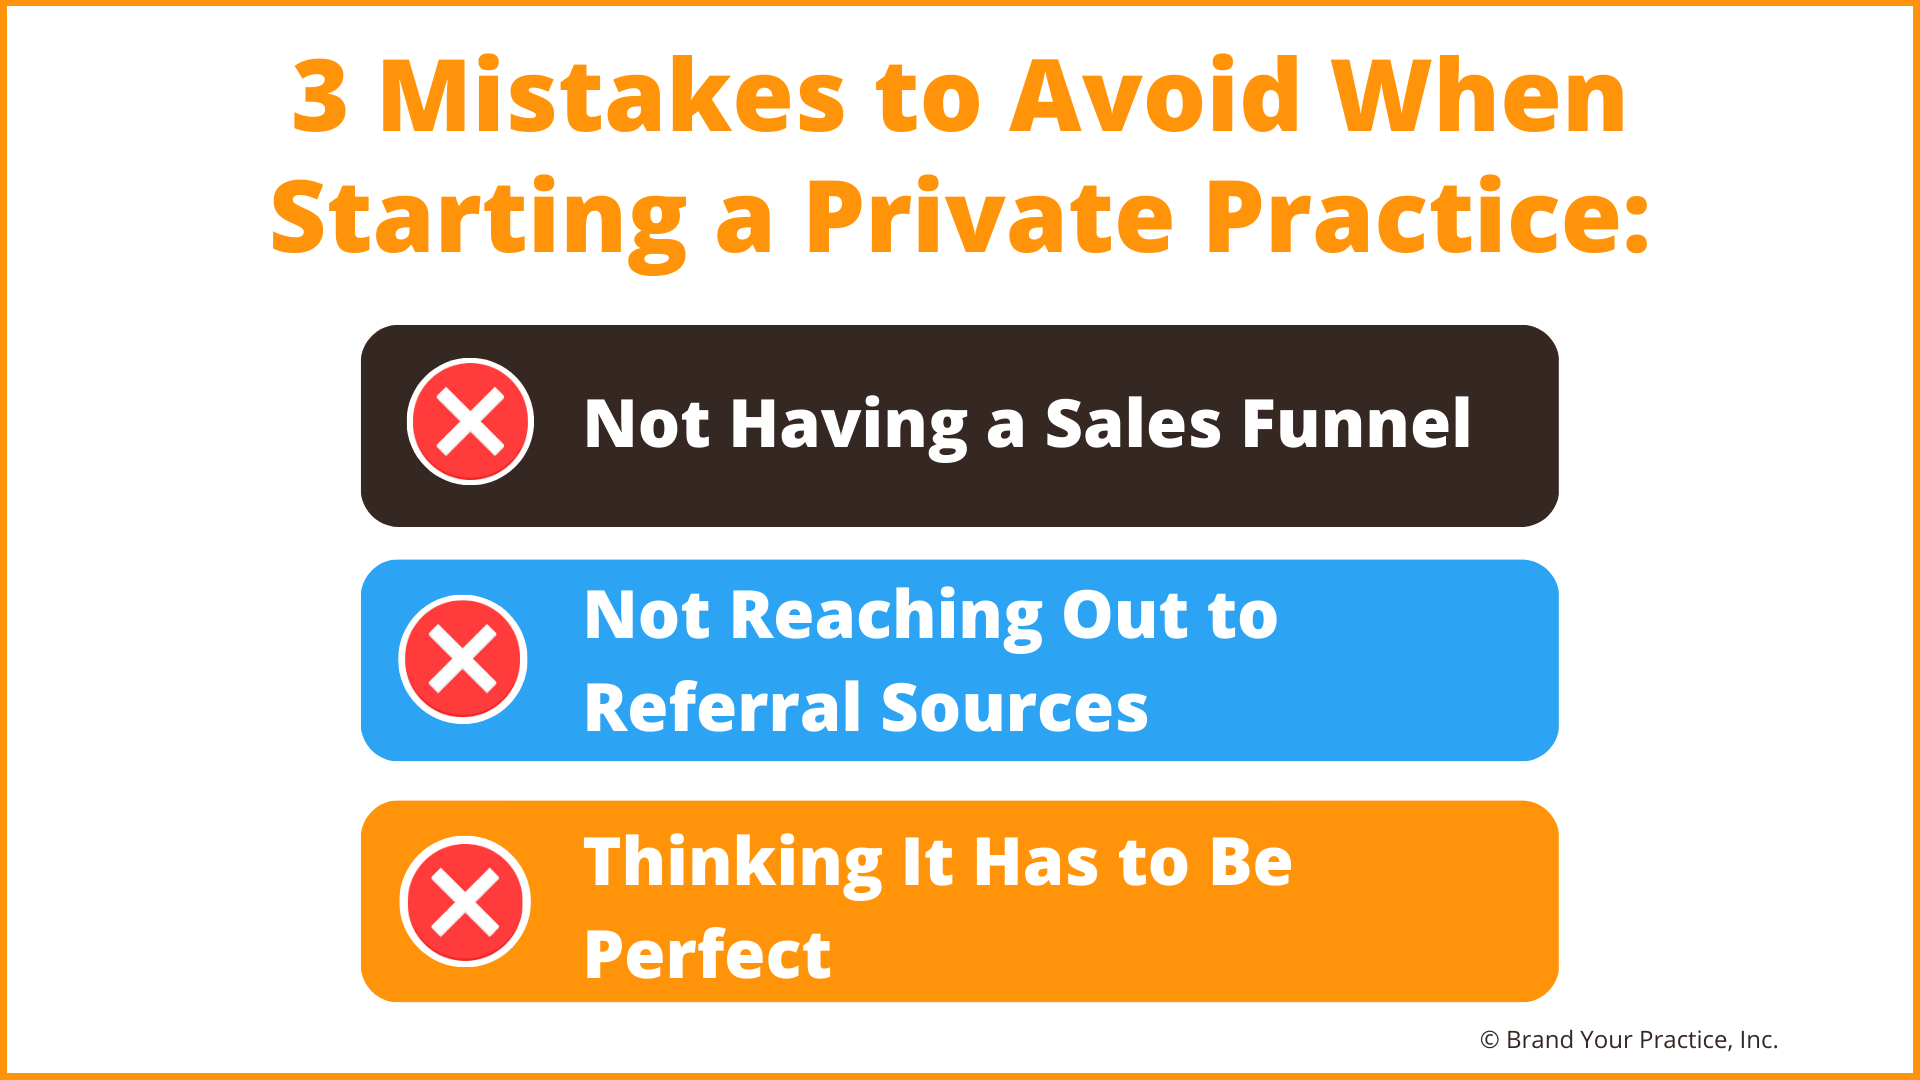 3 Mistakes to Avoid When Starting a Private Practice:<br />
1. Not having a sales funnel<br />
2. Not reaching out to referral sources<br />
3. Thinking it has to be perfect